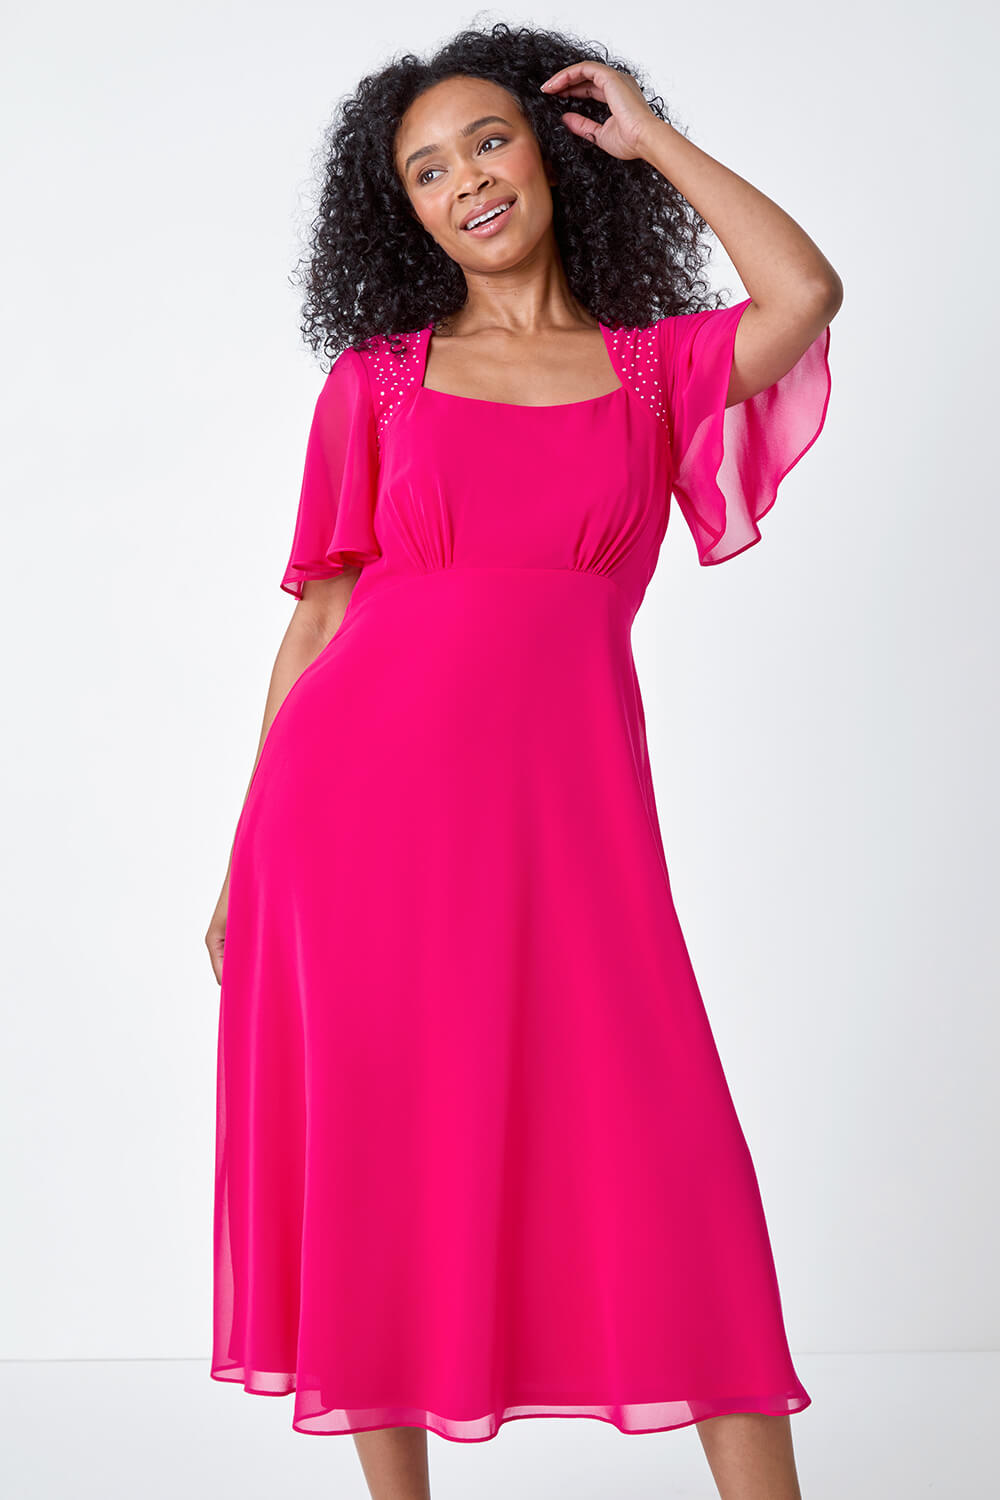 PINK Petite Shimmer Pleated Midi Dress, Image 2 of 5